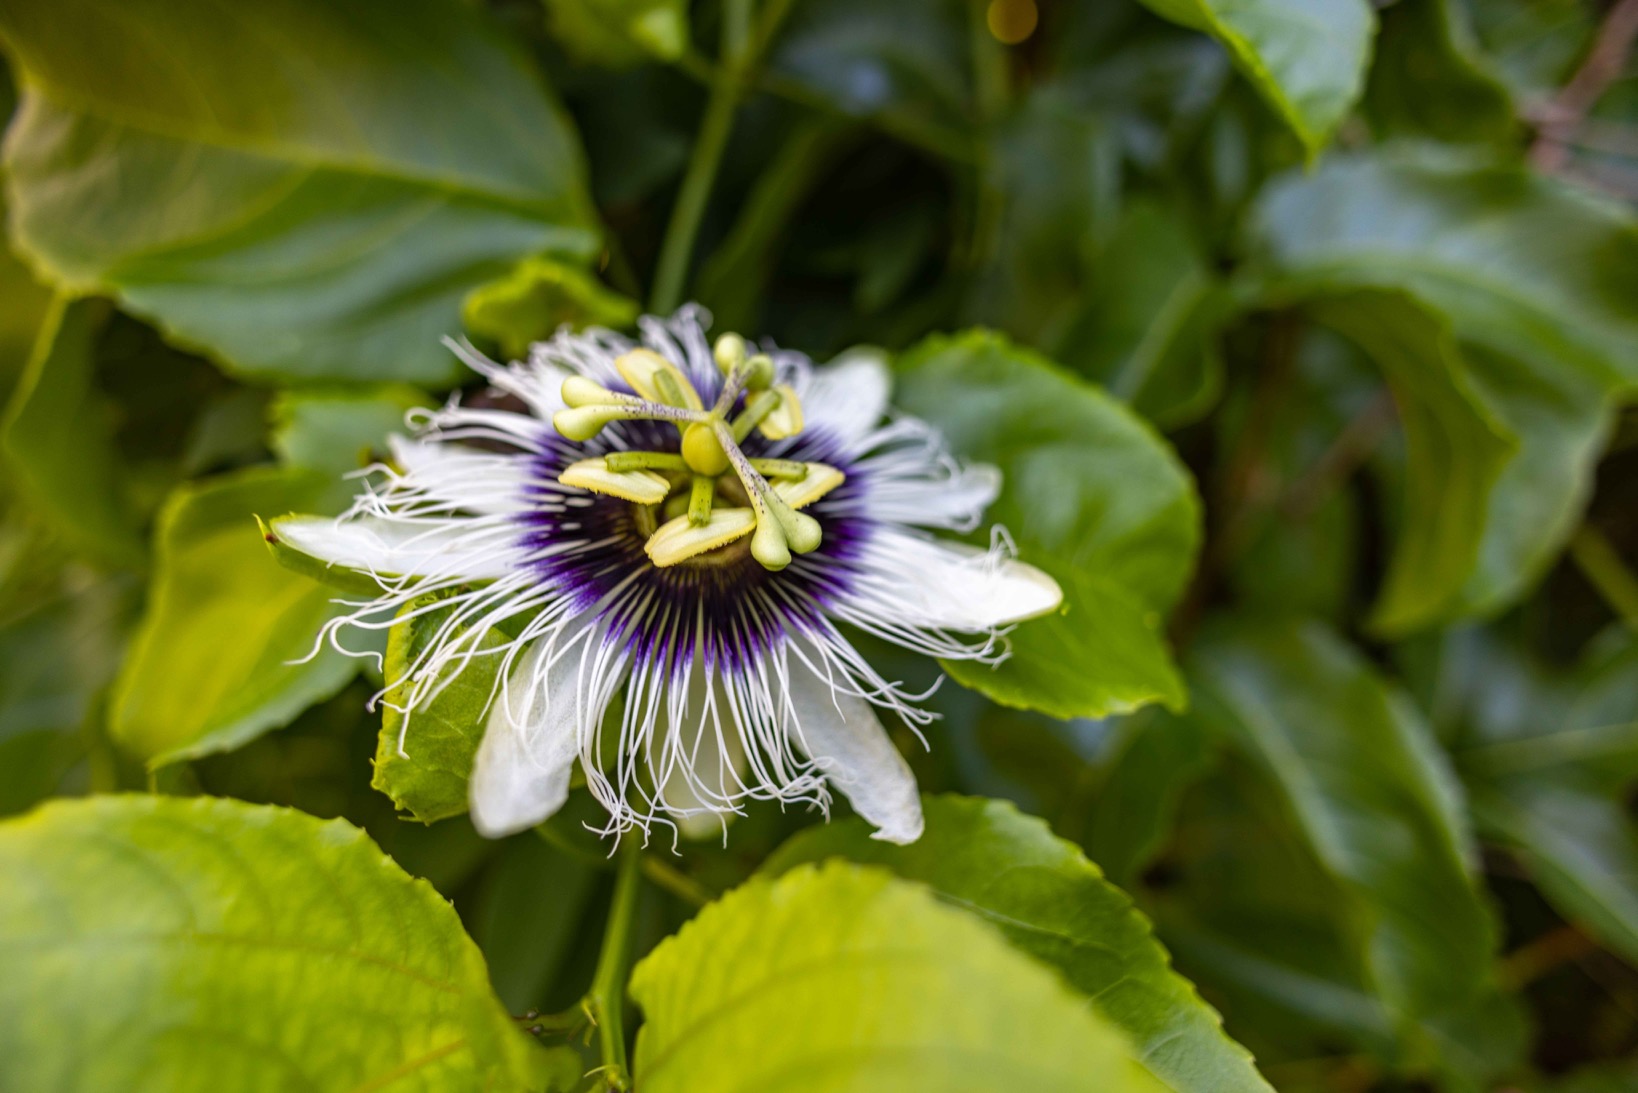 Lilikoi aka passion flower blossoming in spring at our Hale Akua organic farm in Maui